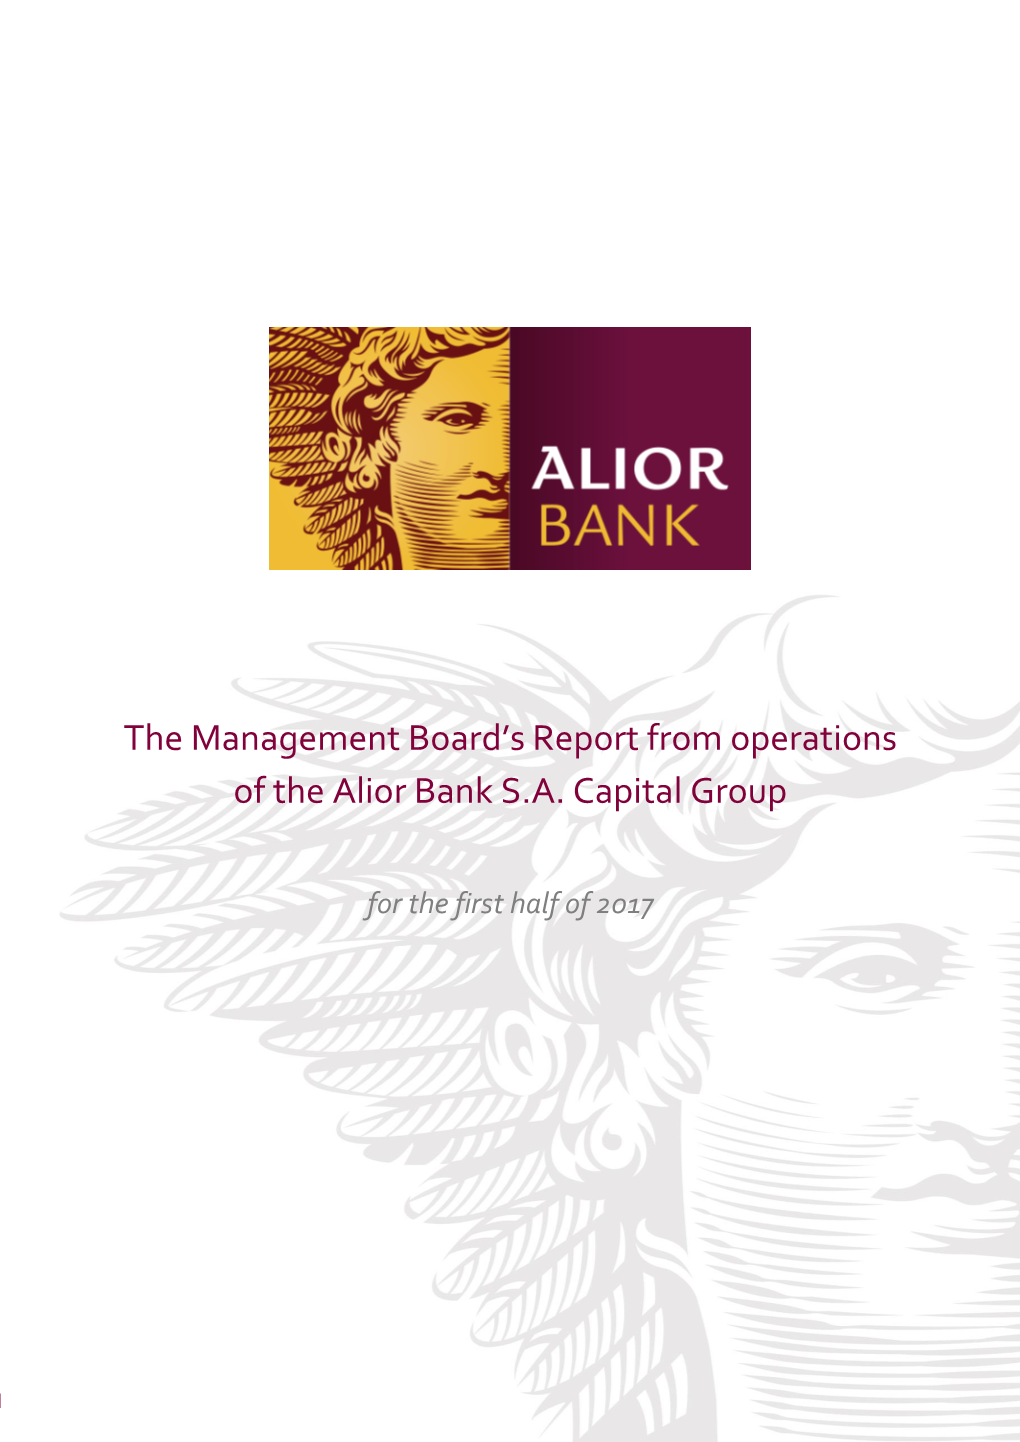 The Management Board's Report from Operations of the Alior Bank S.A